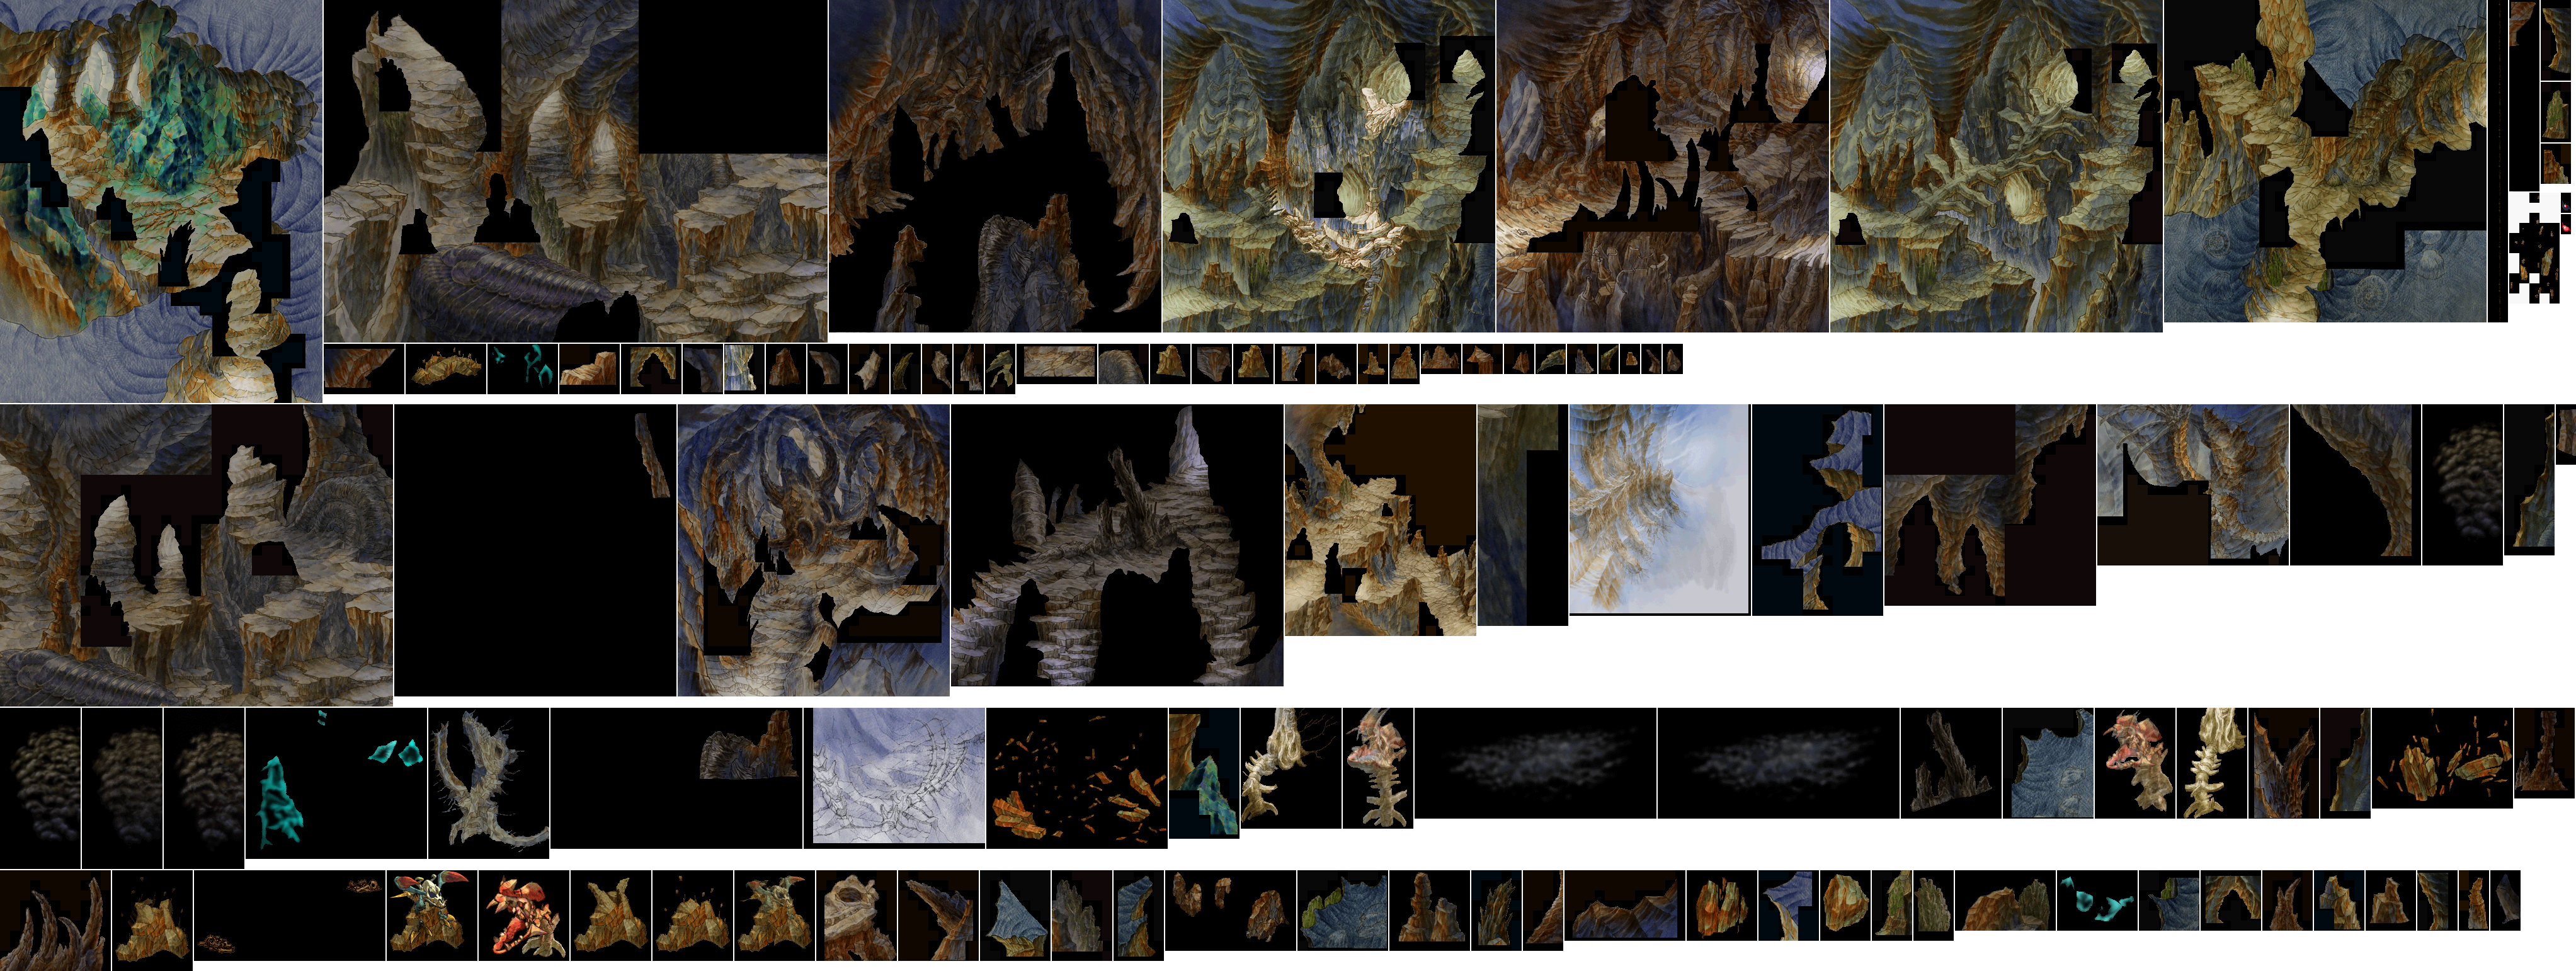 Fossil Caves